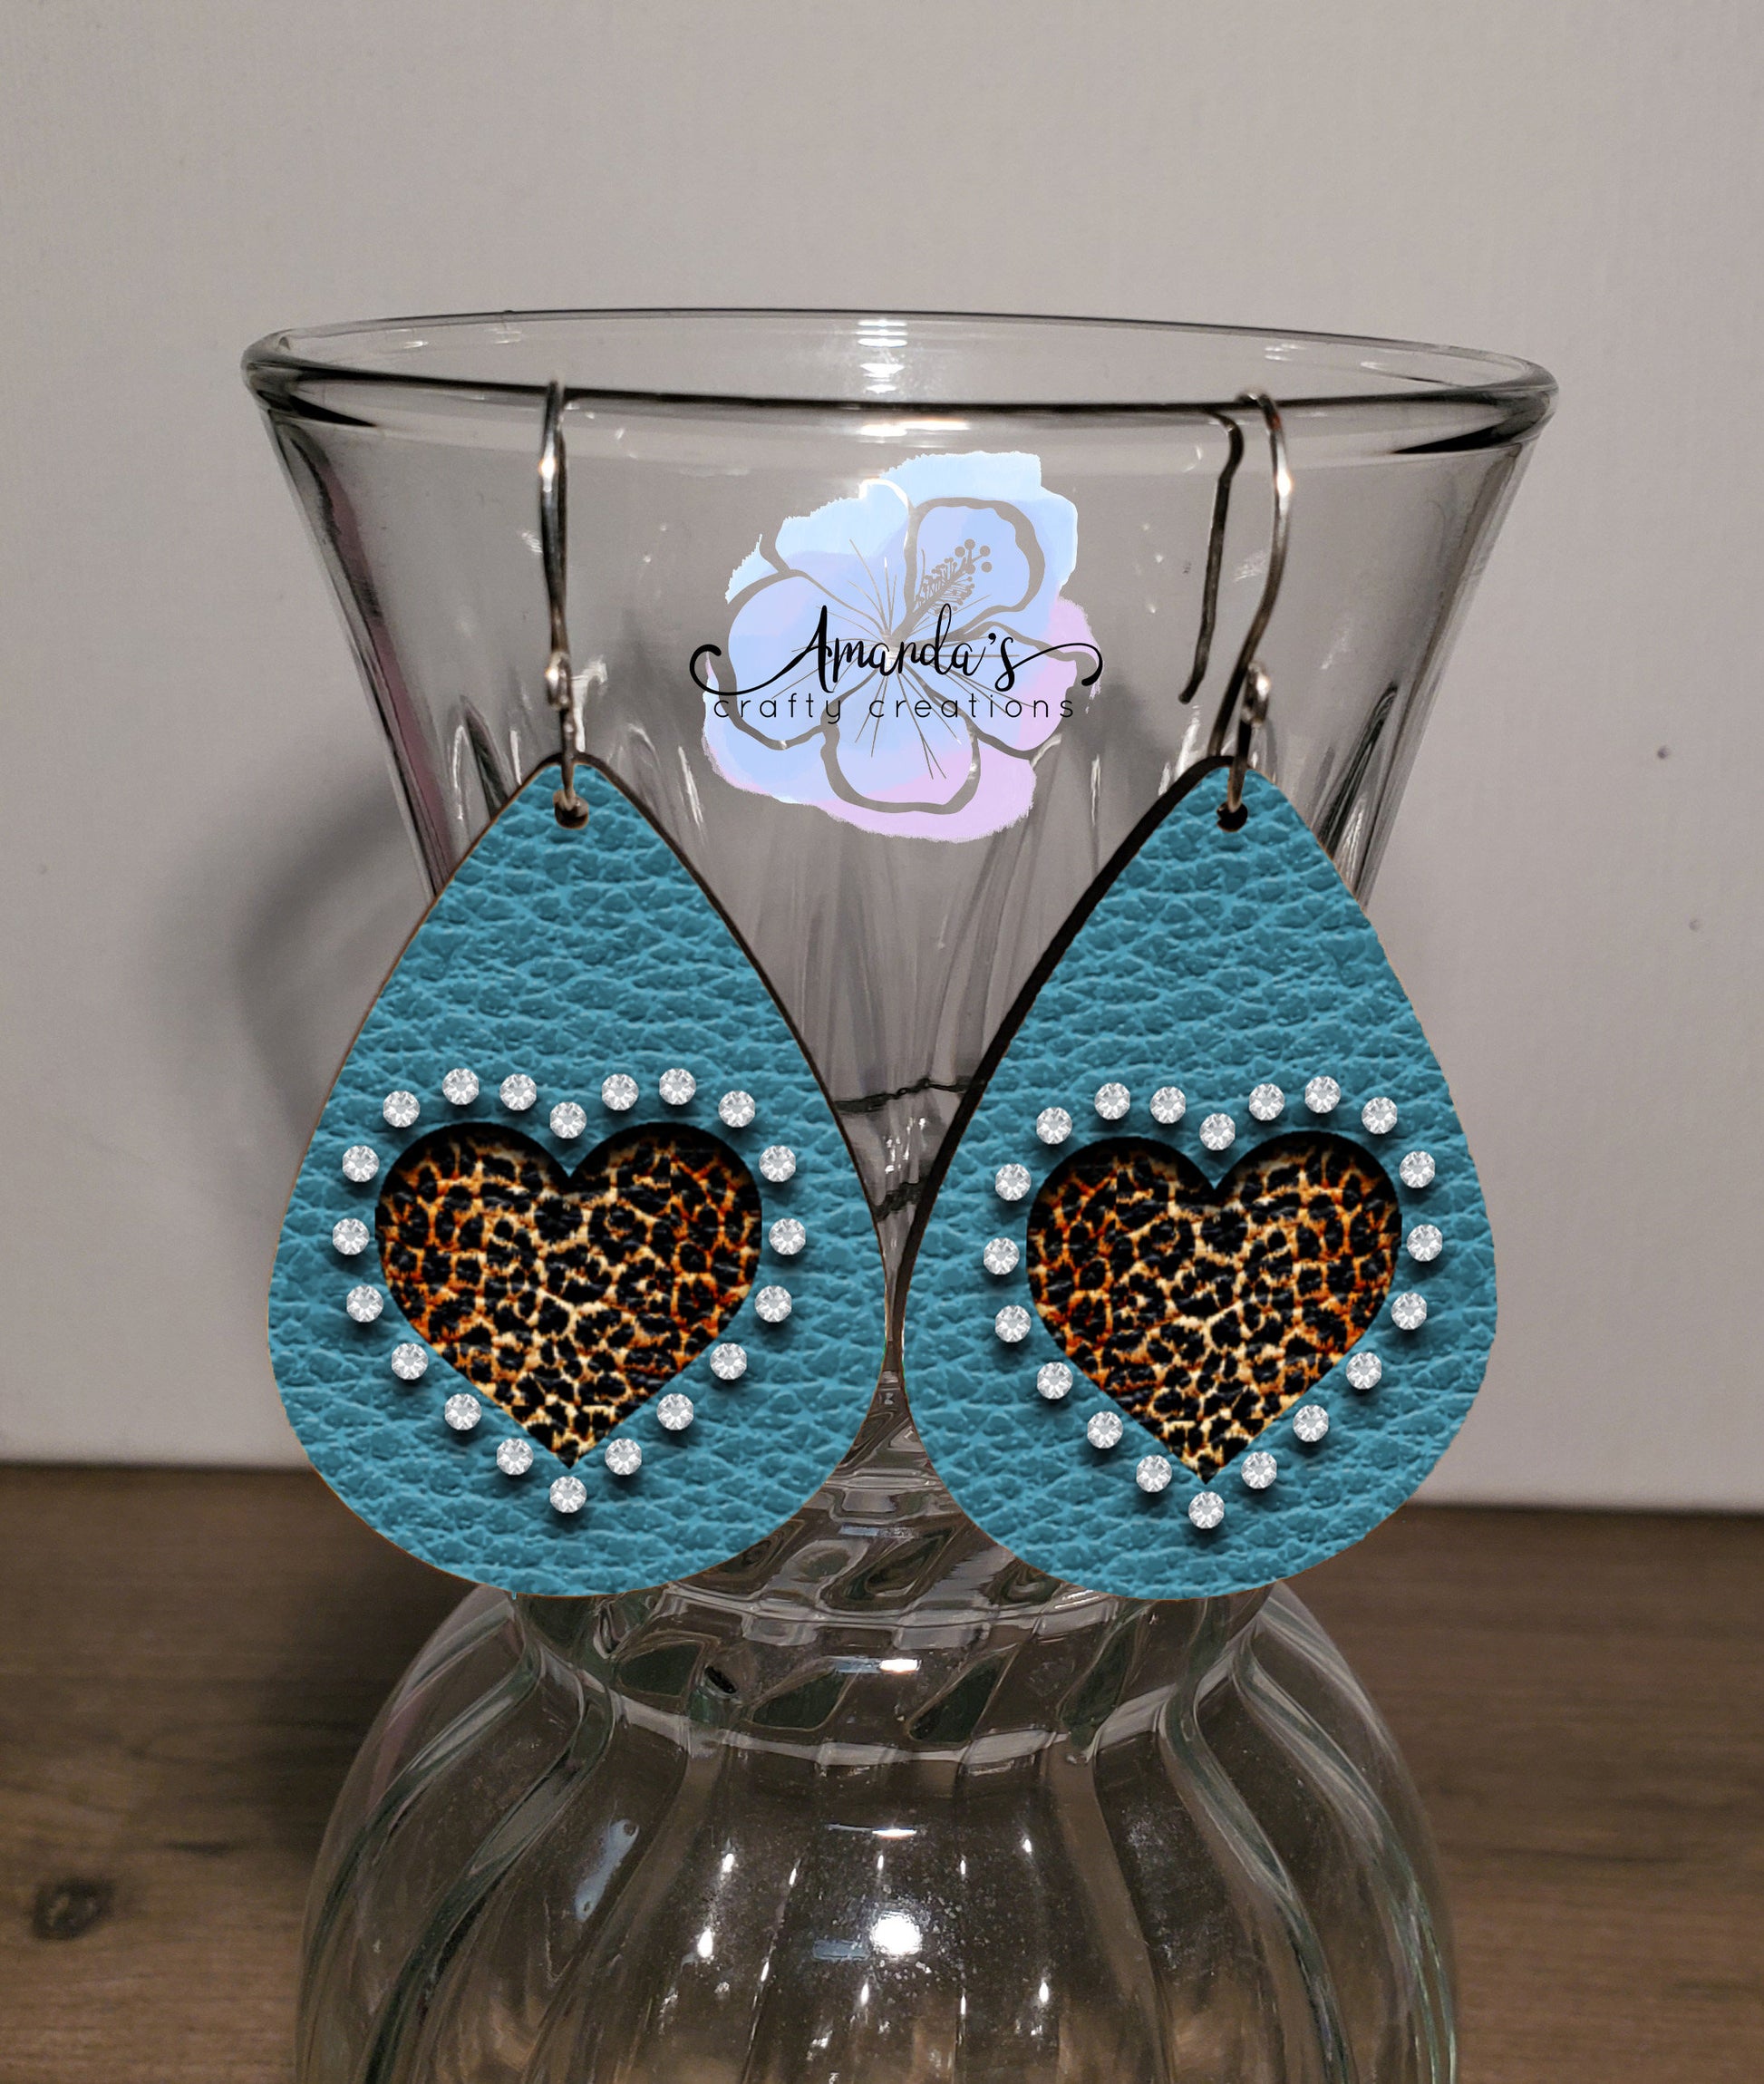 Drop earrings, Turquoise with Leopard print heart and rhinestones